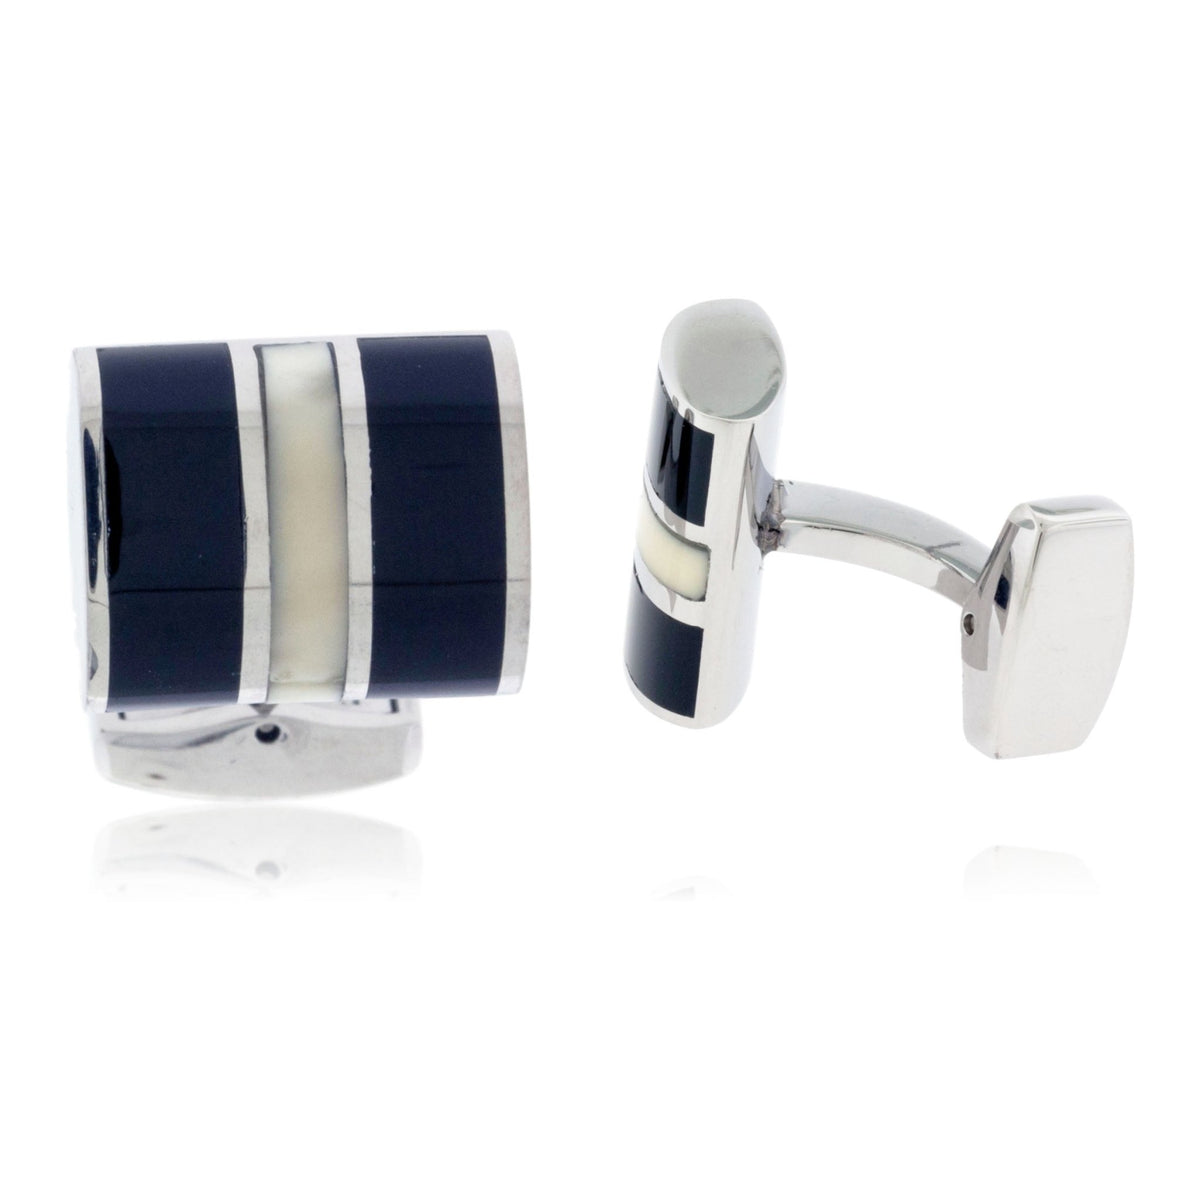 Elk Ivory Root and Onyx Inlaid Cuff Links - Park City Jewelers